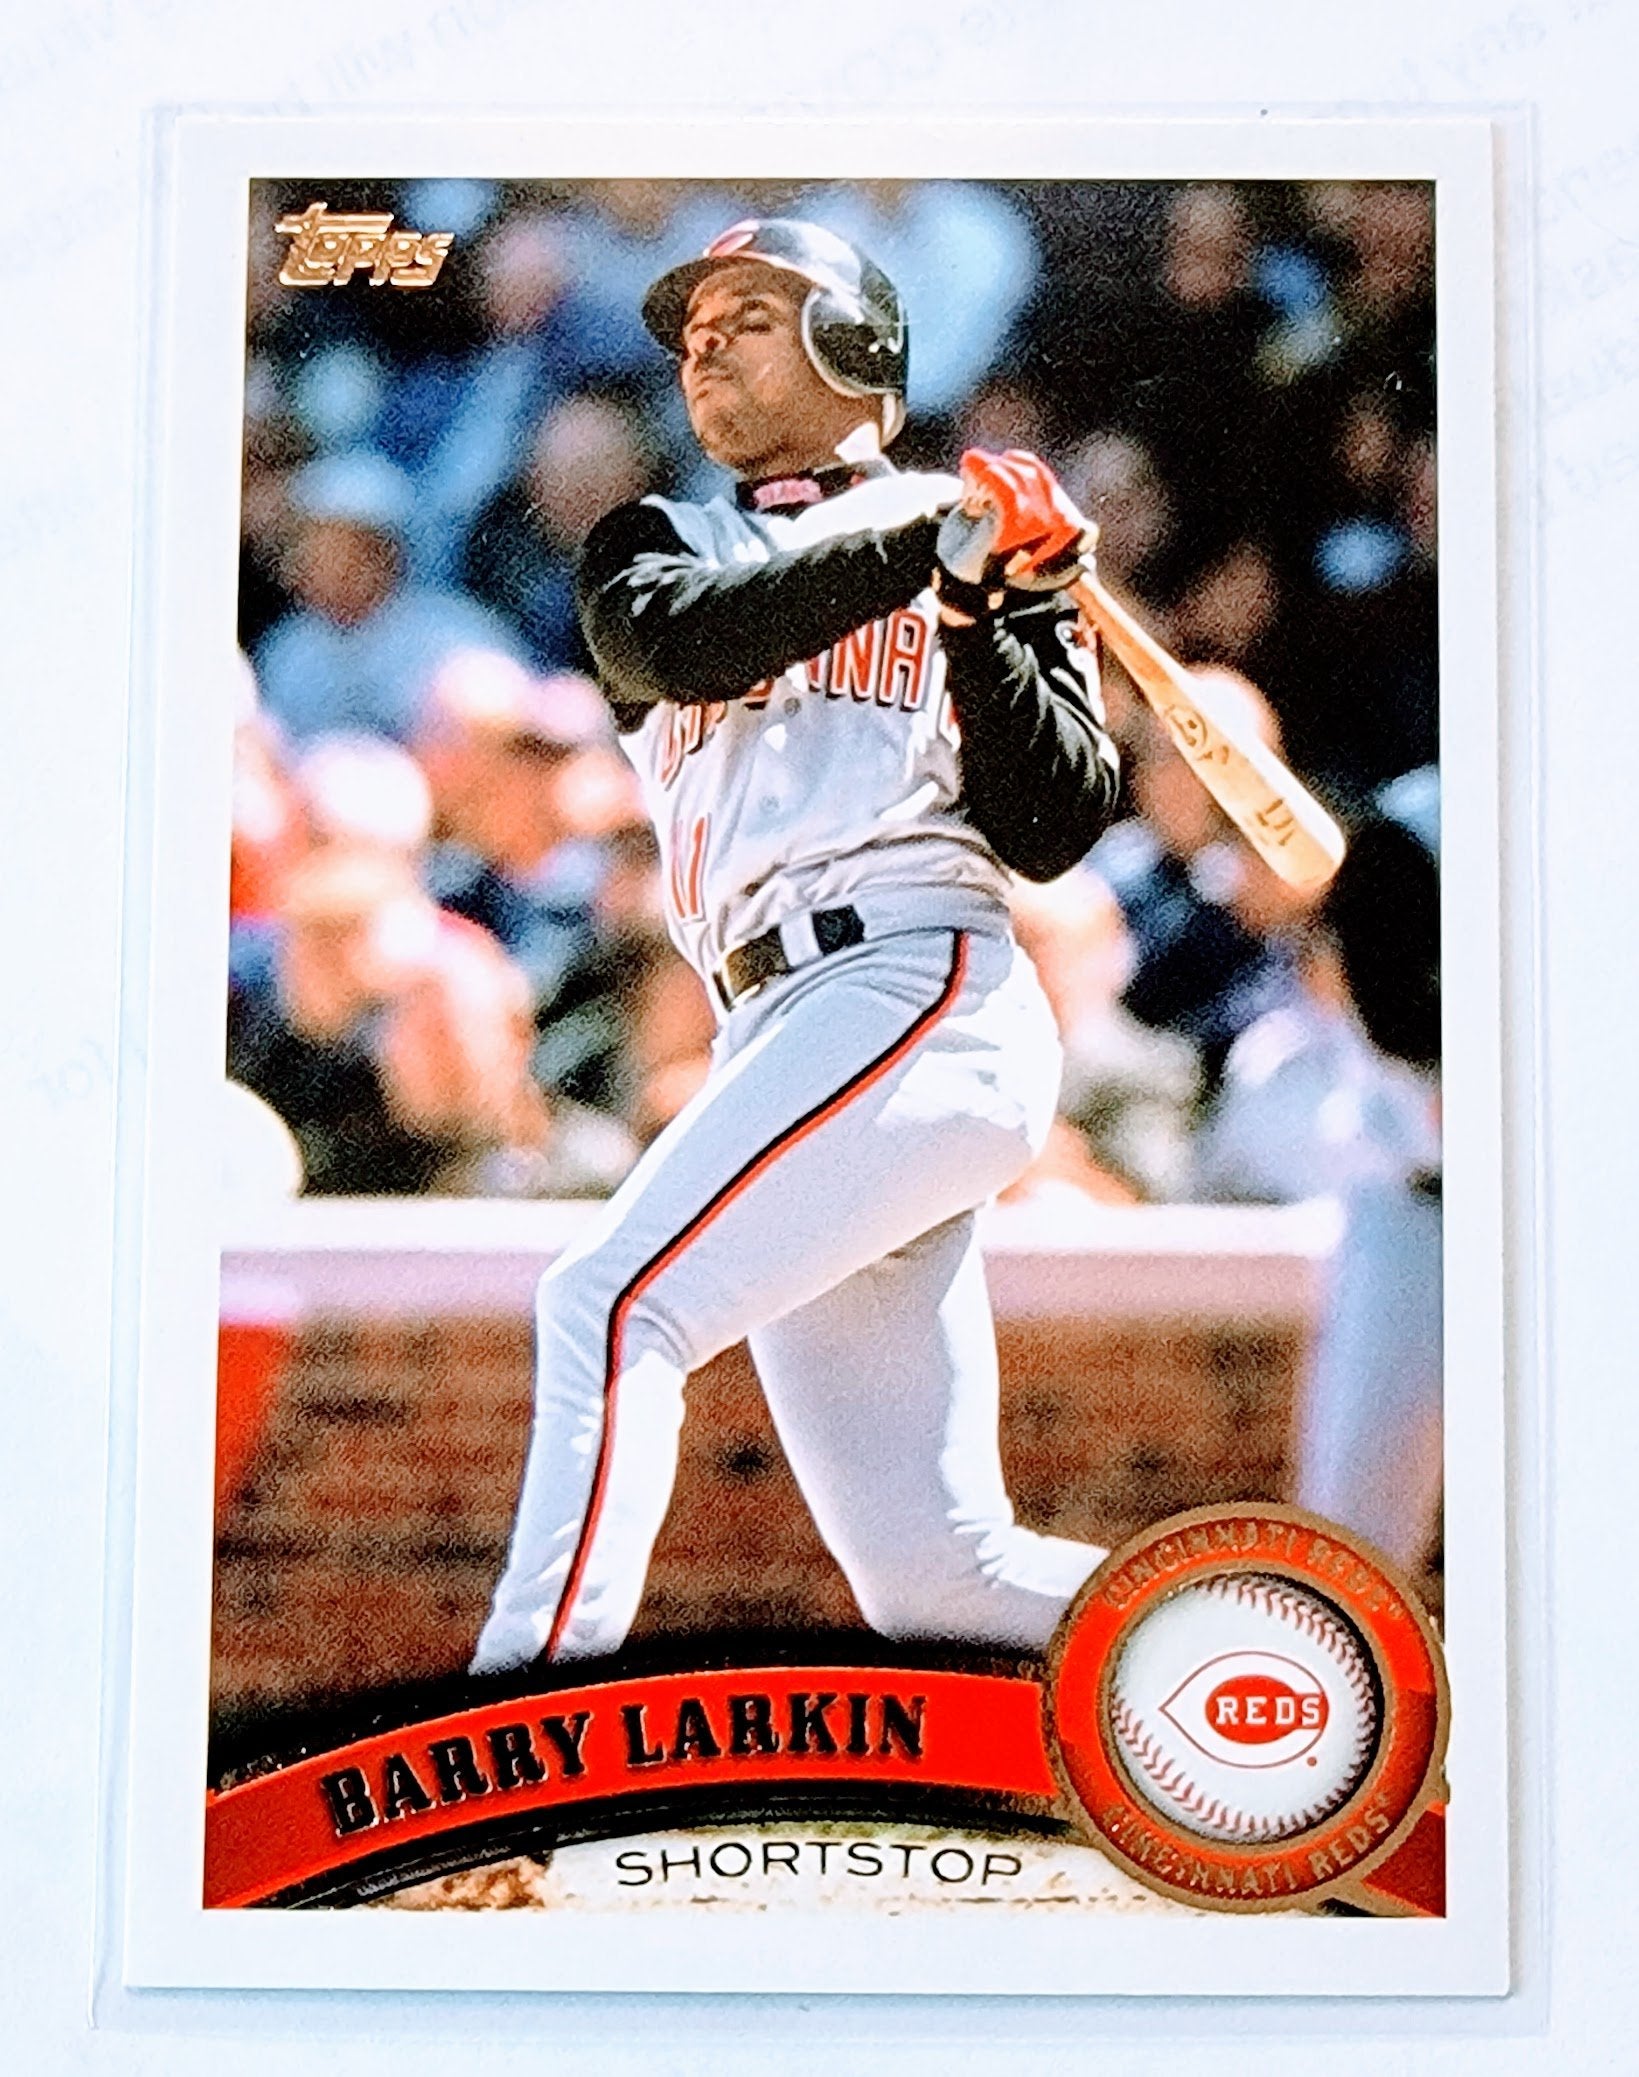 2021 Topps Archives Barry Larkin 2011 Baseball Trading Card SMCB1 simple Xclusive Collectibles   